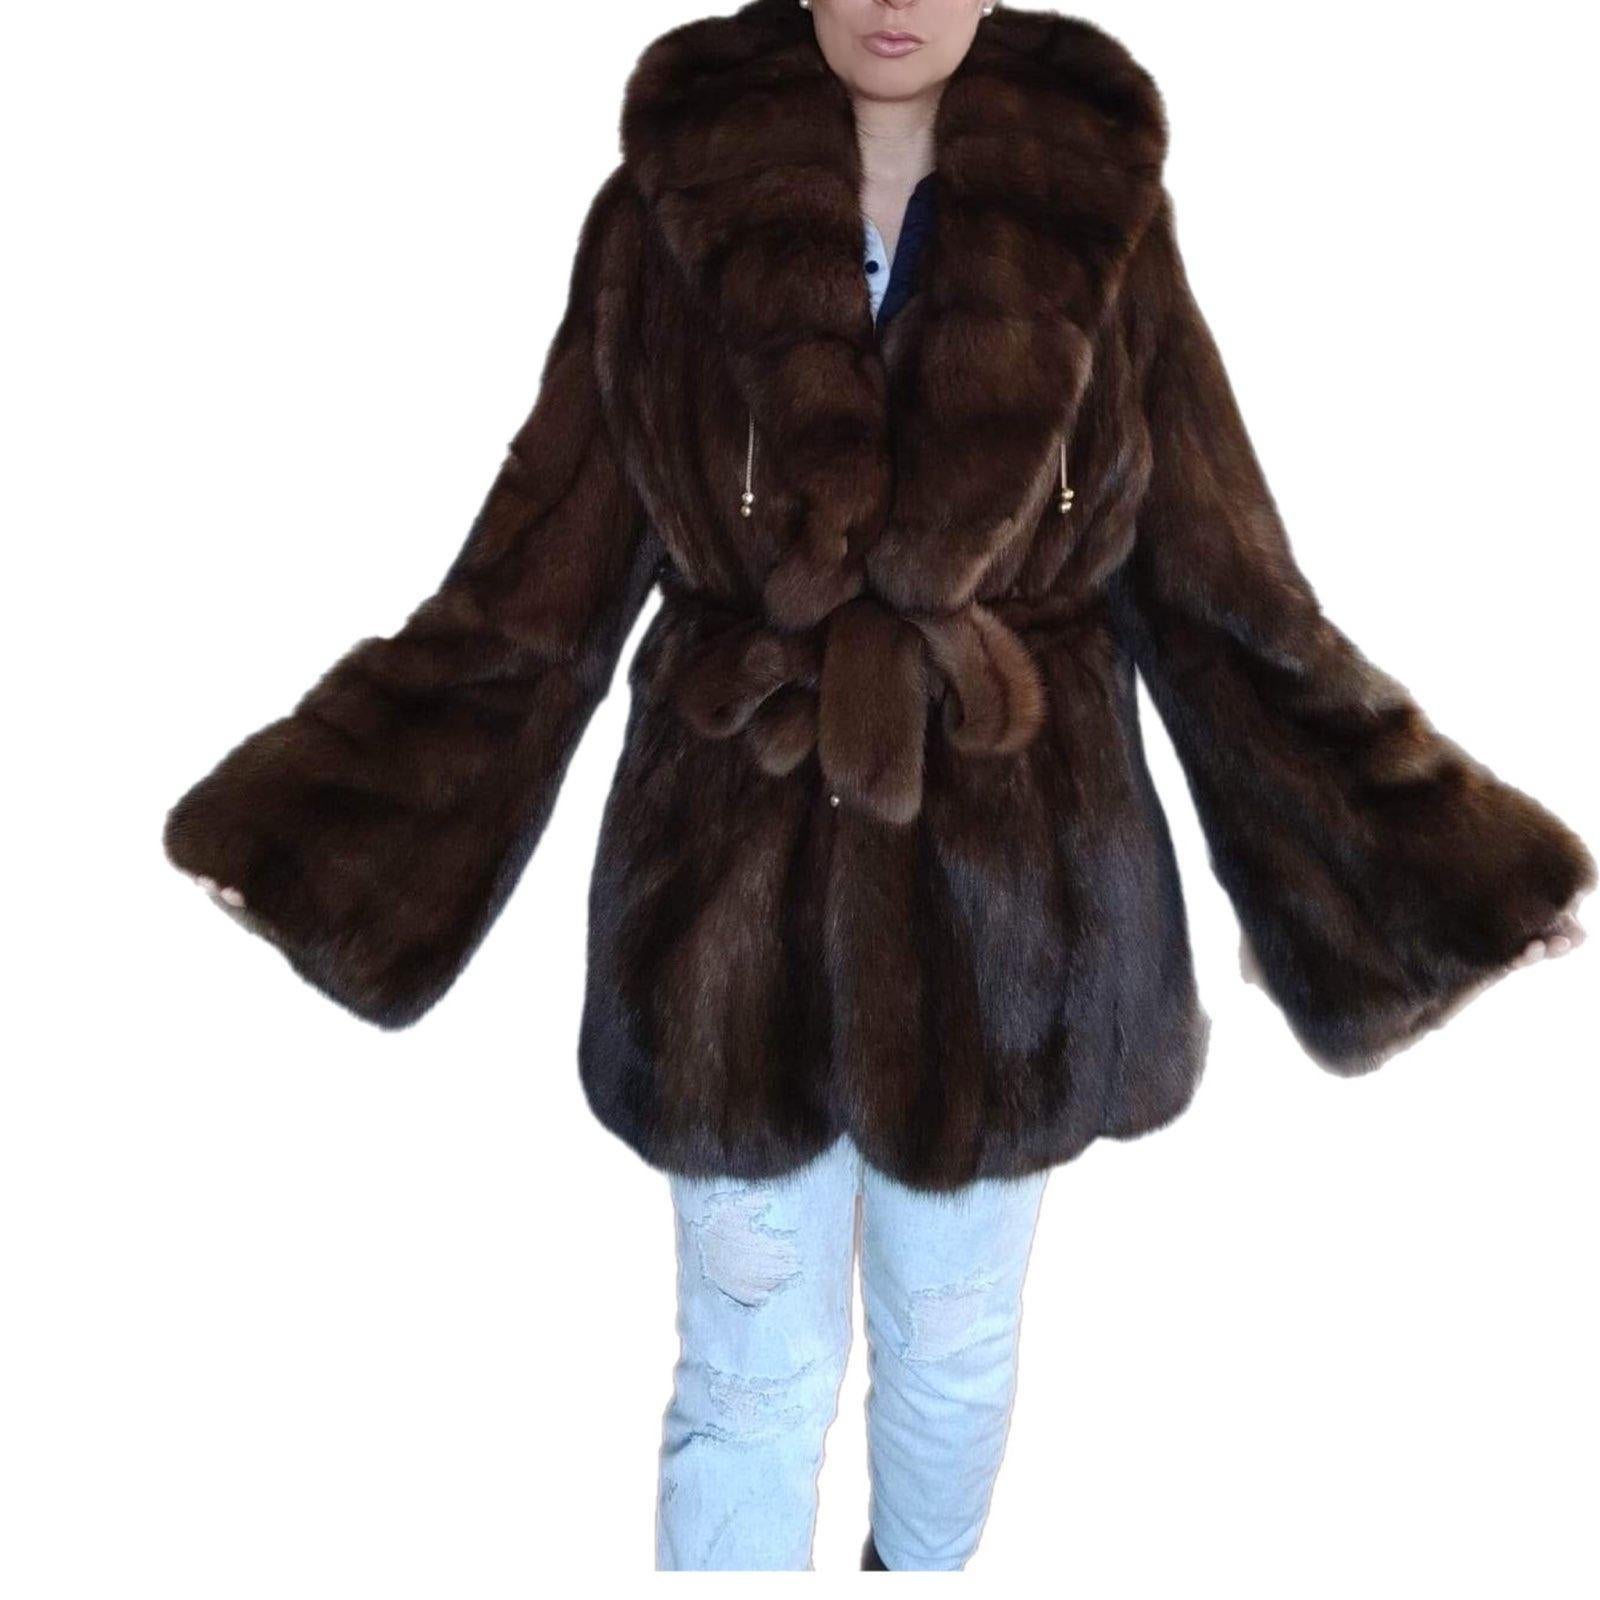 Christian Dior Russian Sable fur coat size 12 tags 55000$ For Sale 6